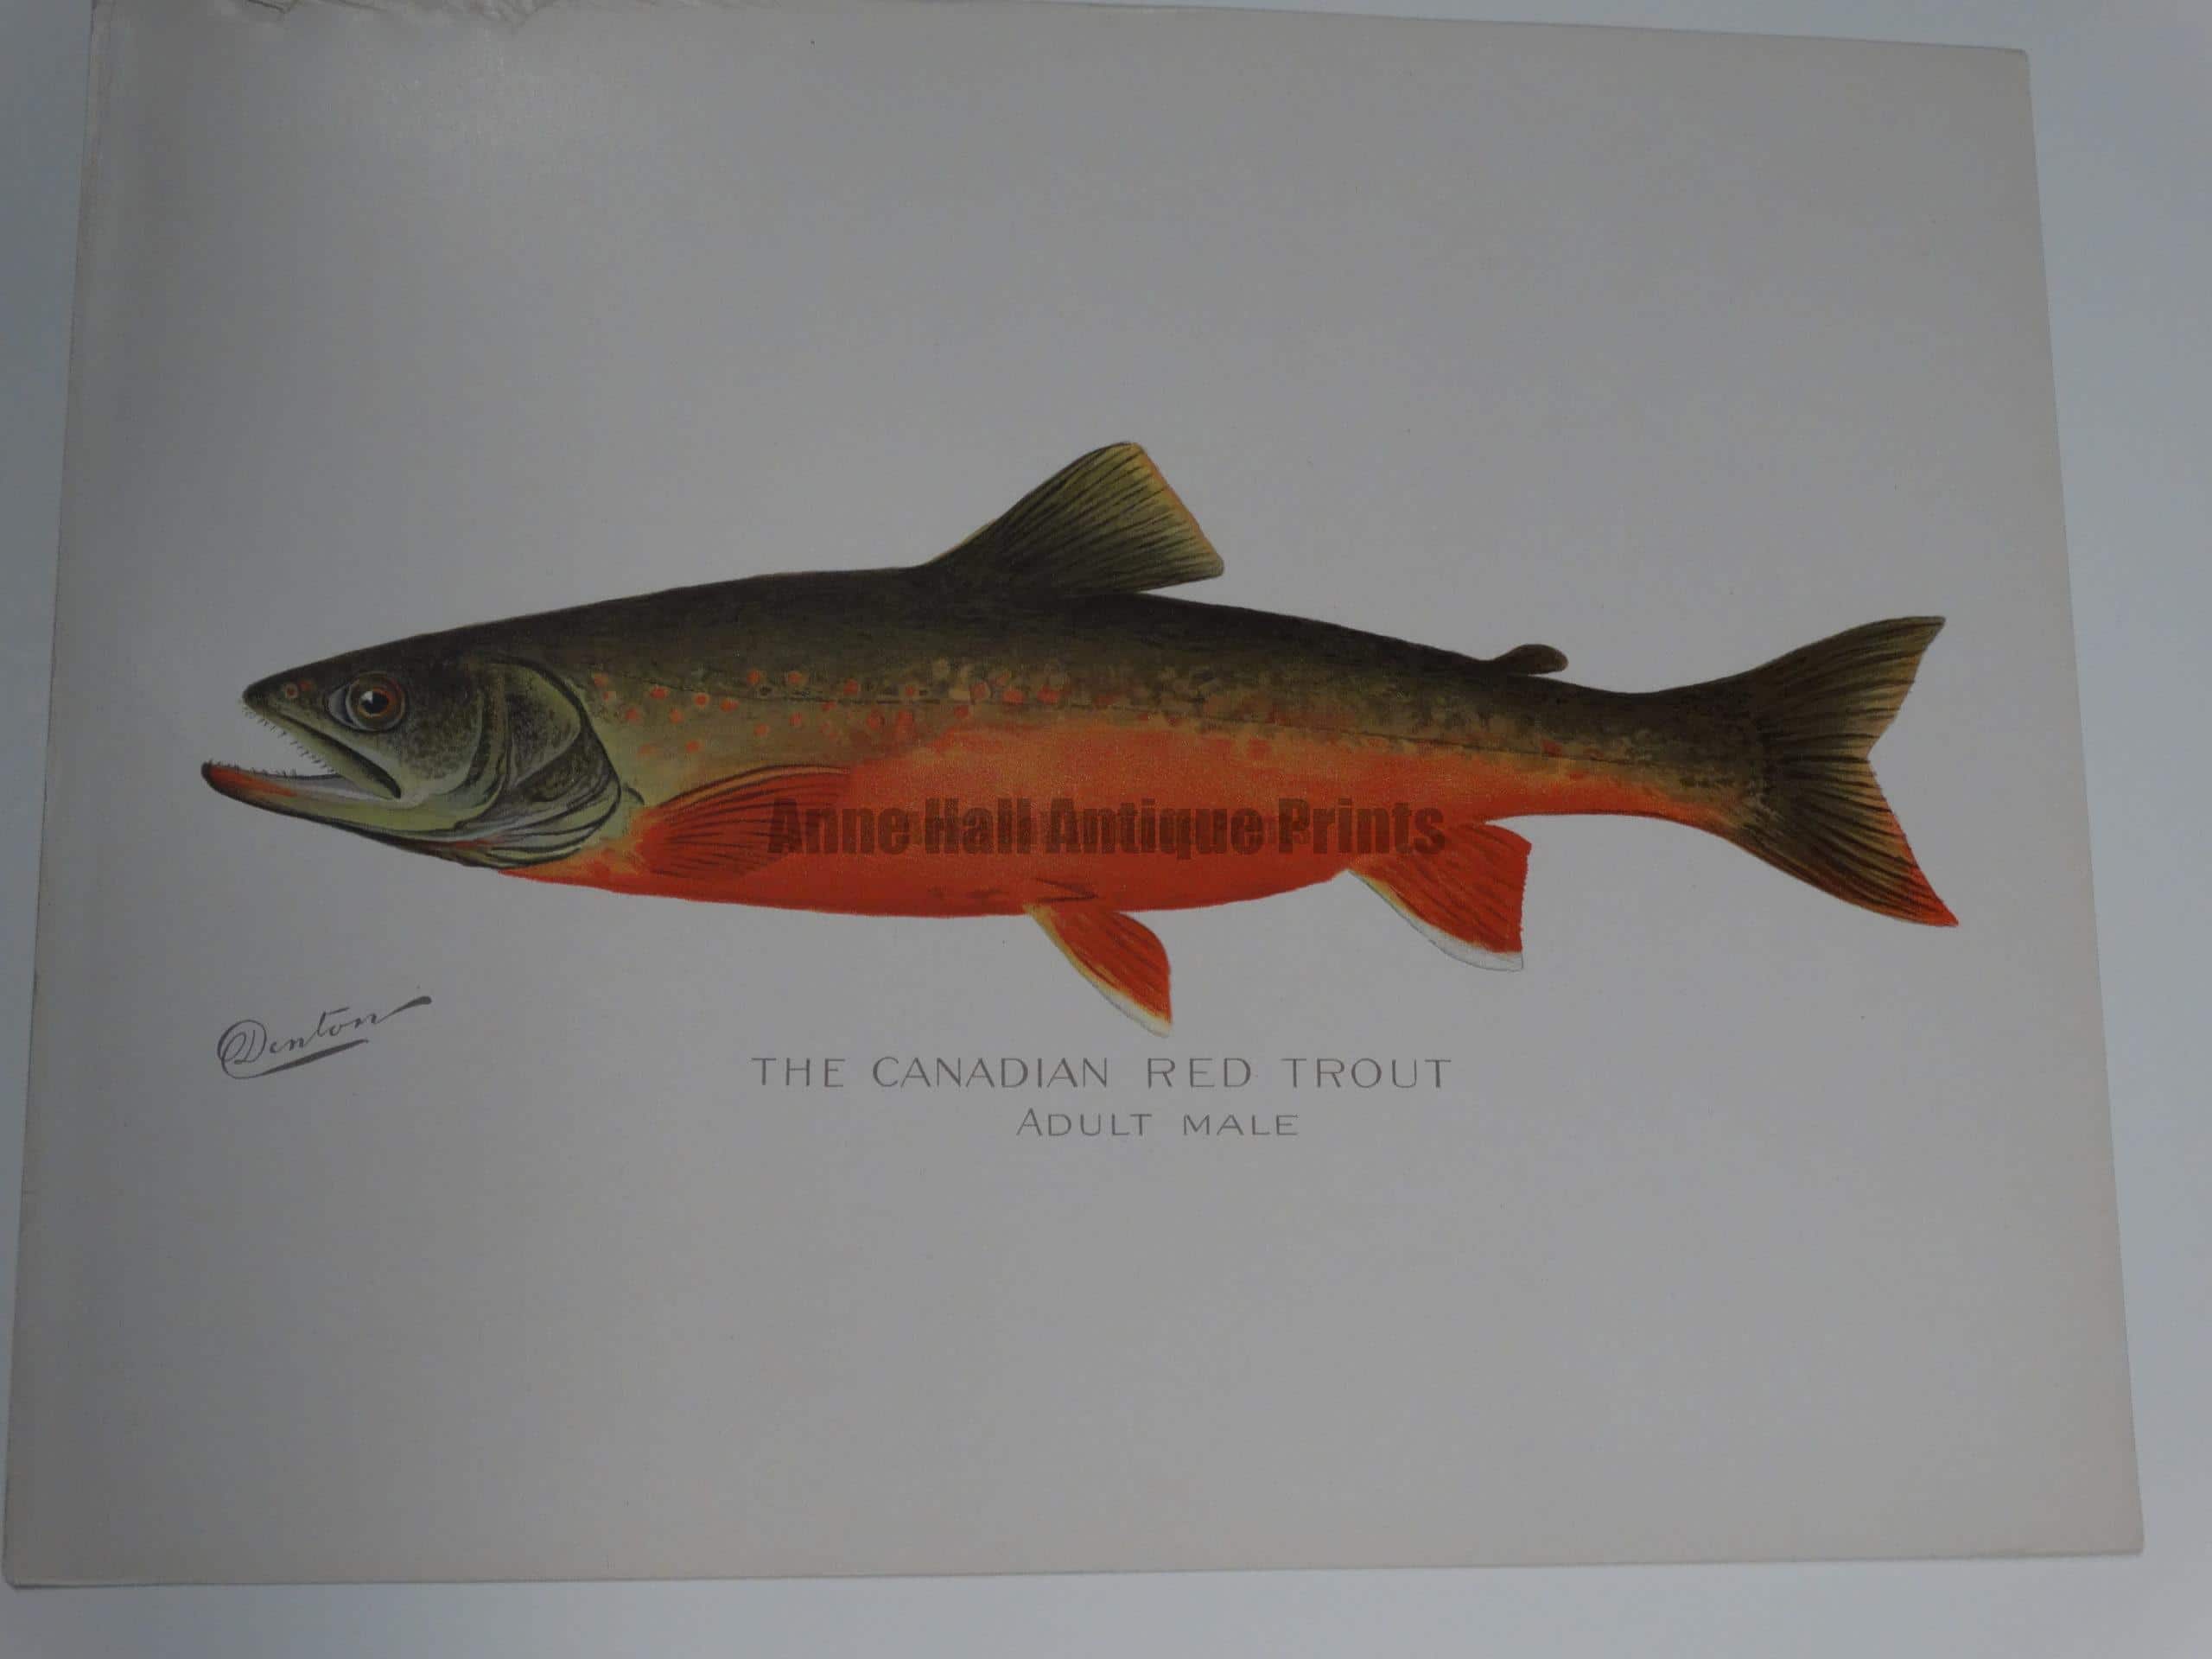 Denton Male Canadian Trout.  $100.  An outstanding portfolio color lithograph published for Sherman Denton as documentation of trout-salmon found in North America.  9 1/2 x 12" 